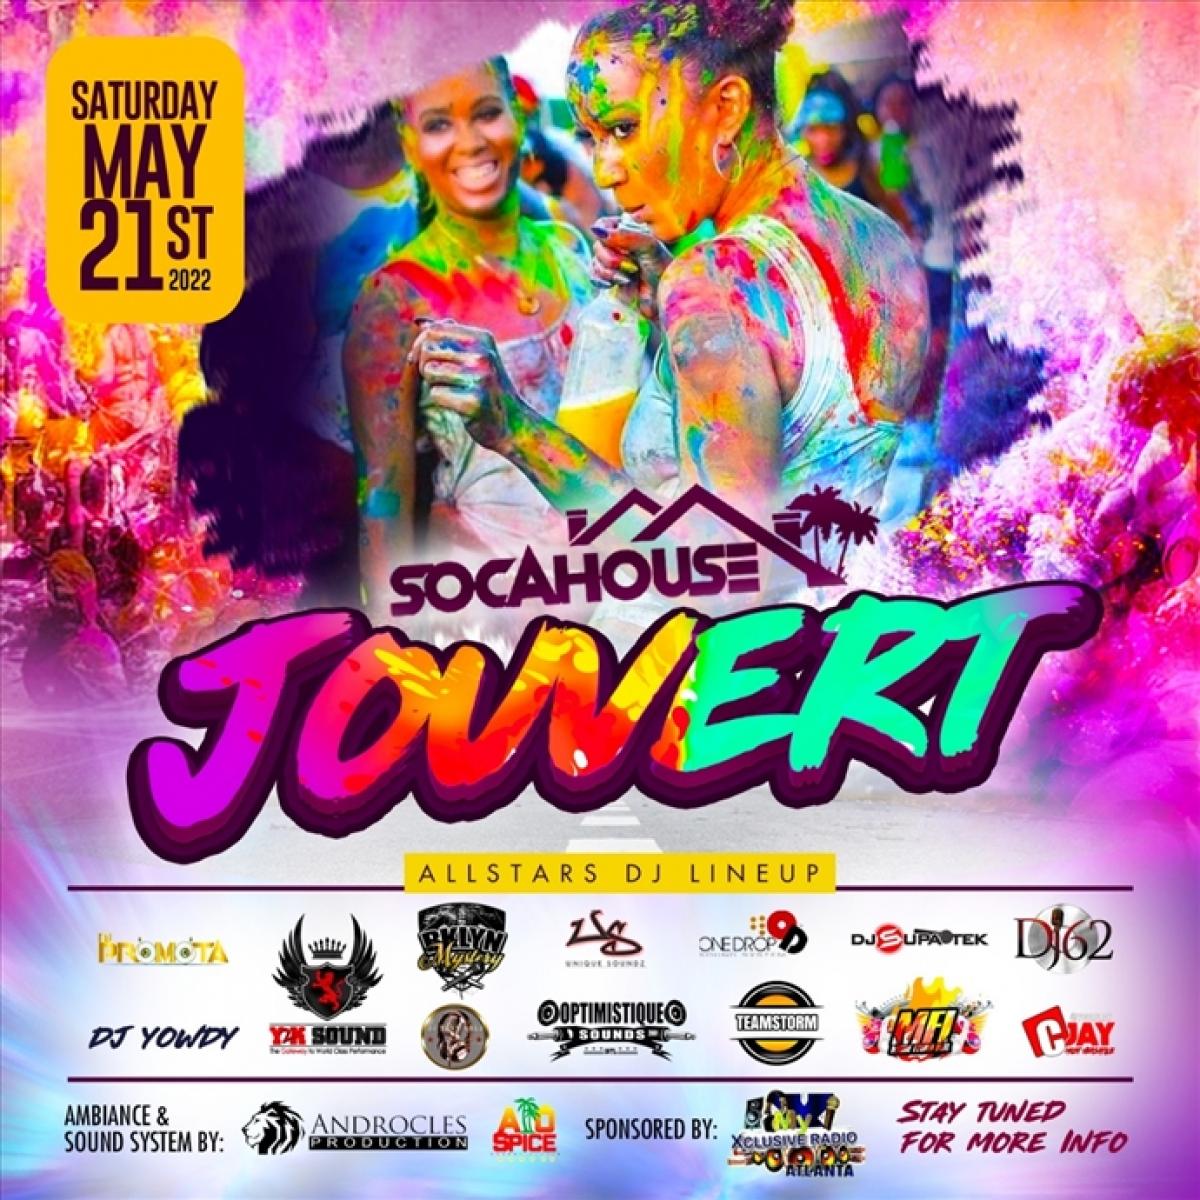 Soca House Jouvert 2022 flyer or graphic.